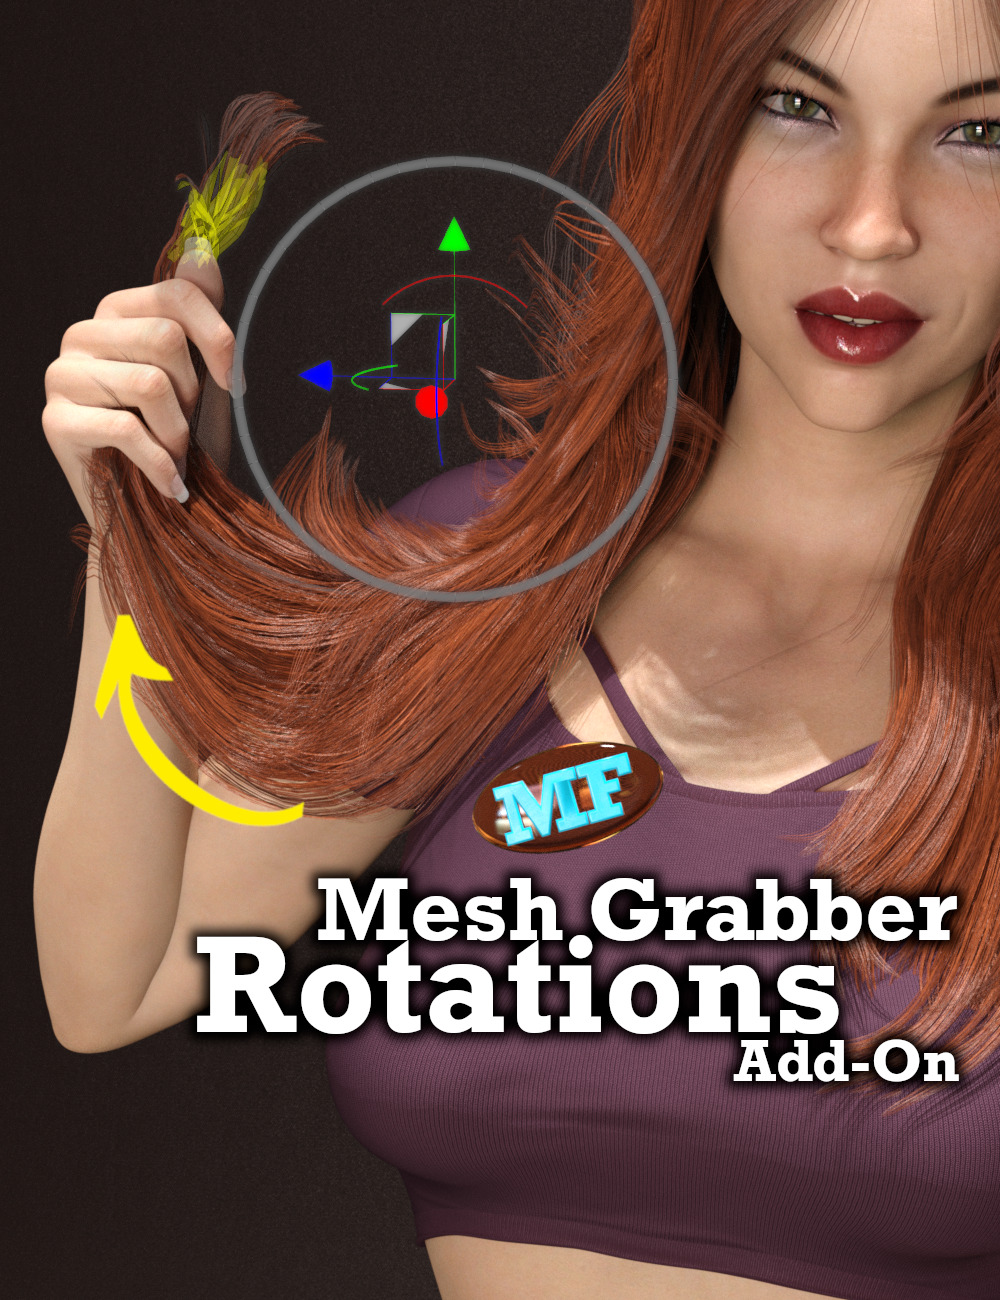 Mesh Grabber Rotations Add-On (Win) by: ManFriday, 3D Models by Daz 3D